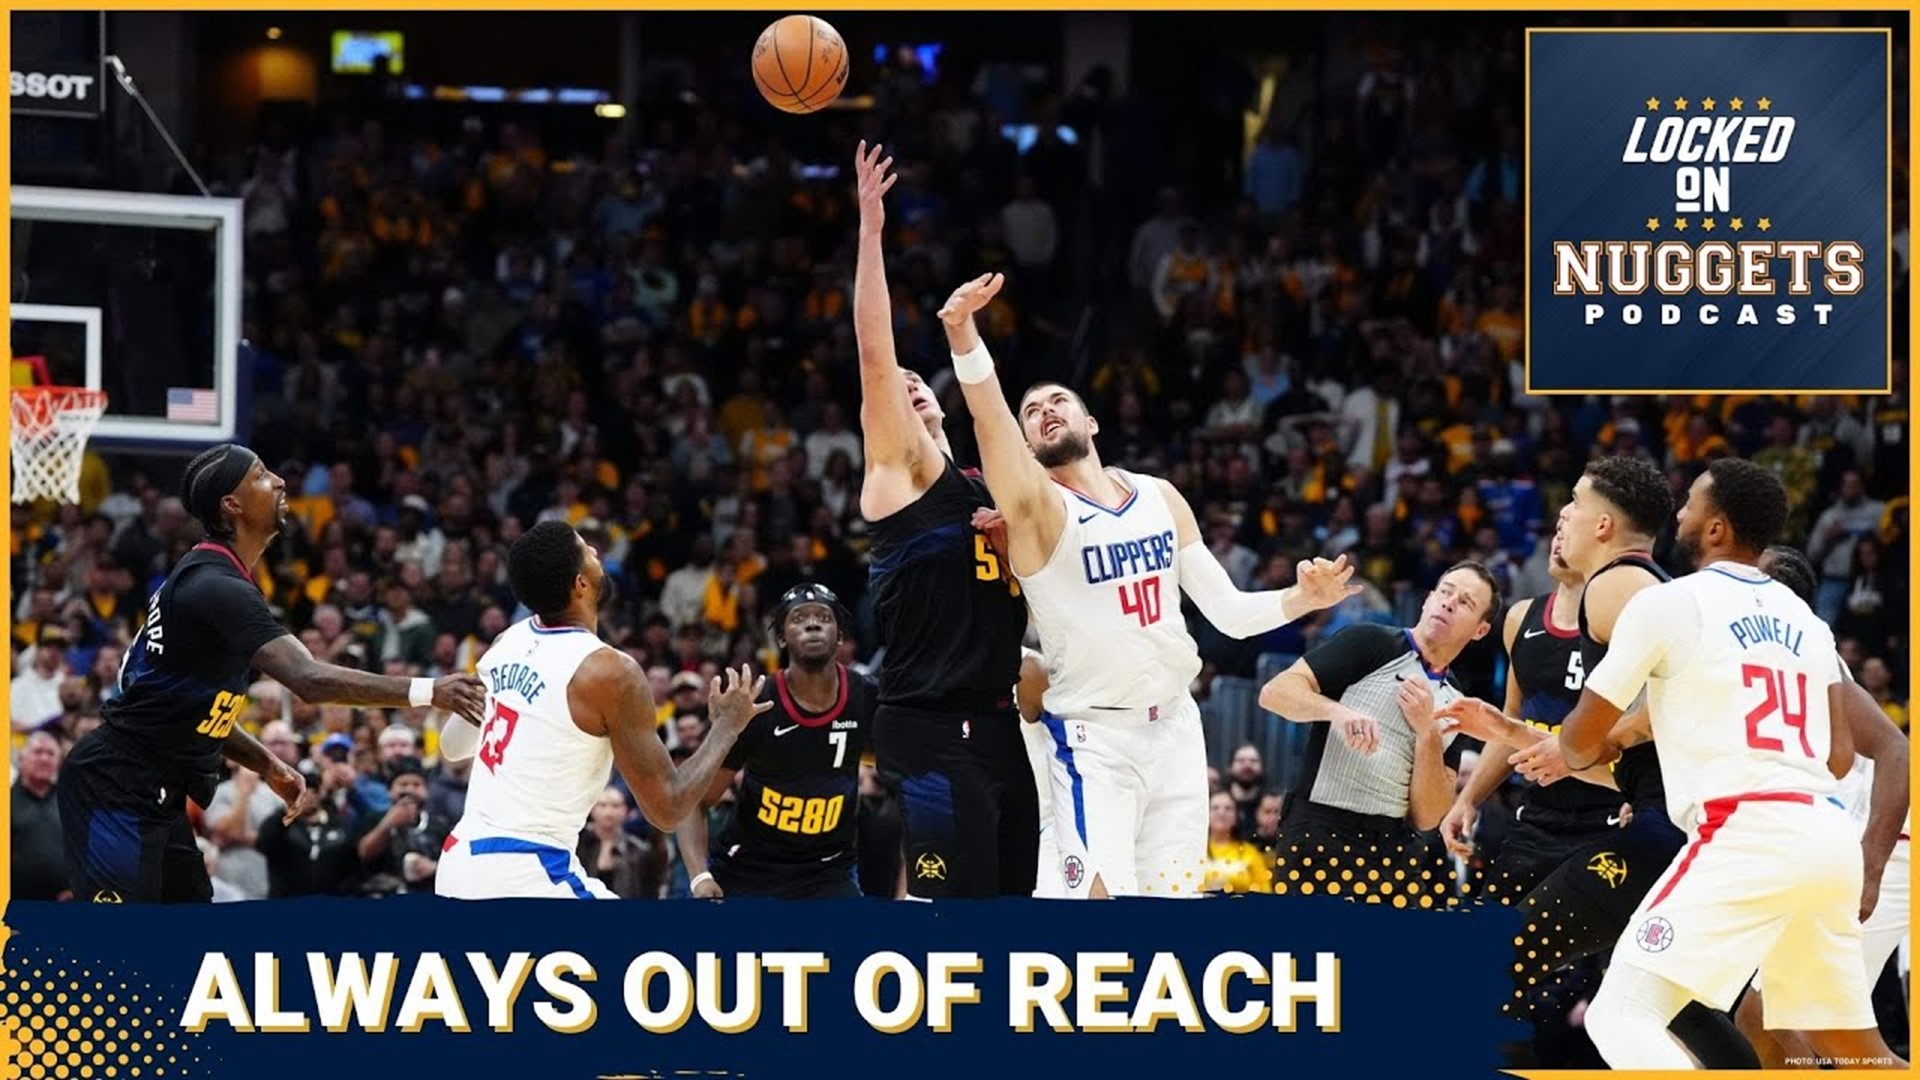 The Nuggets once again topple the Clippers. Just when it looked like LA might finally get a win over Denver, the Nuggets' clutch time defense and Nikola Jokic arrive